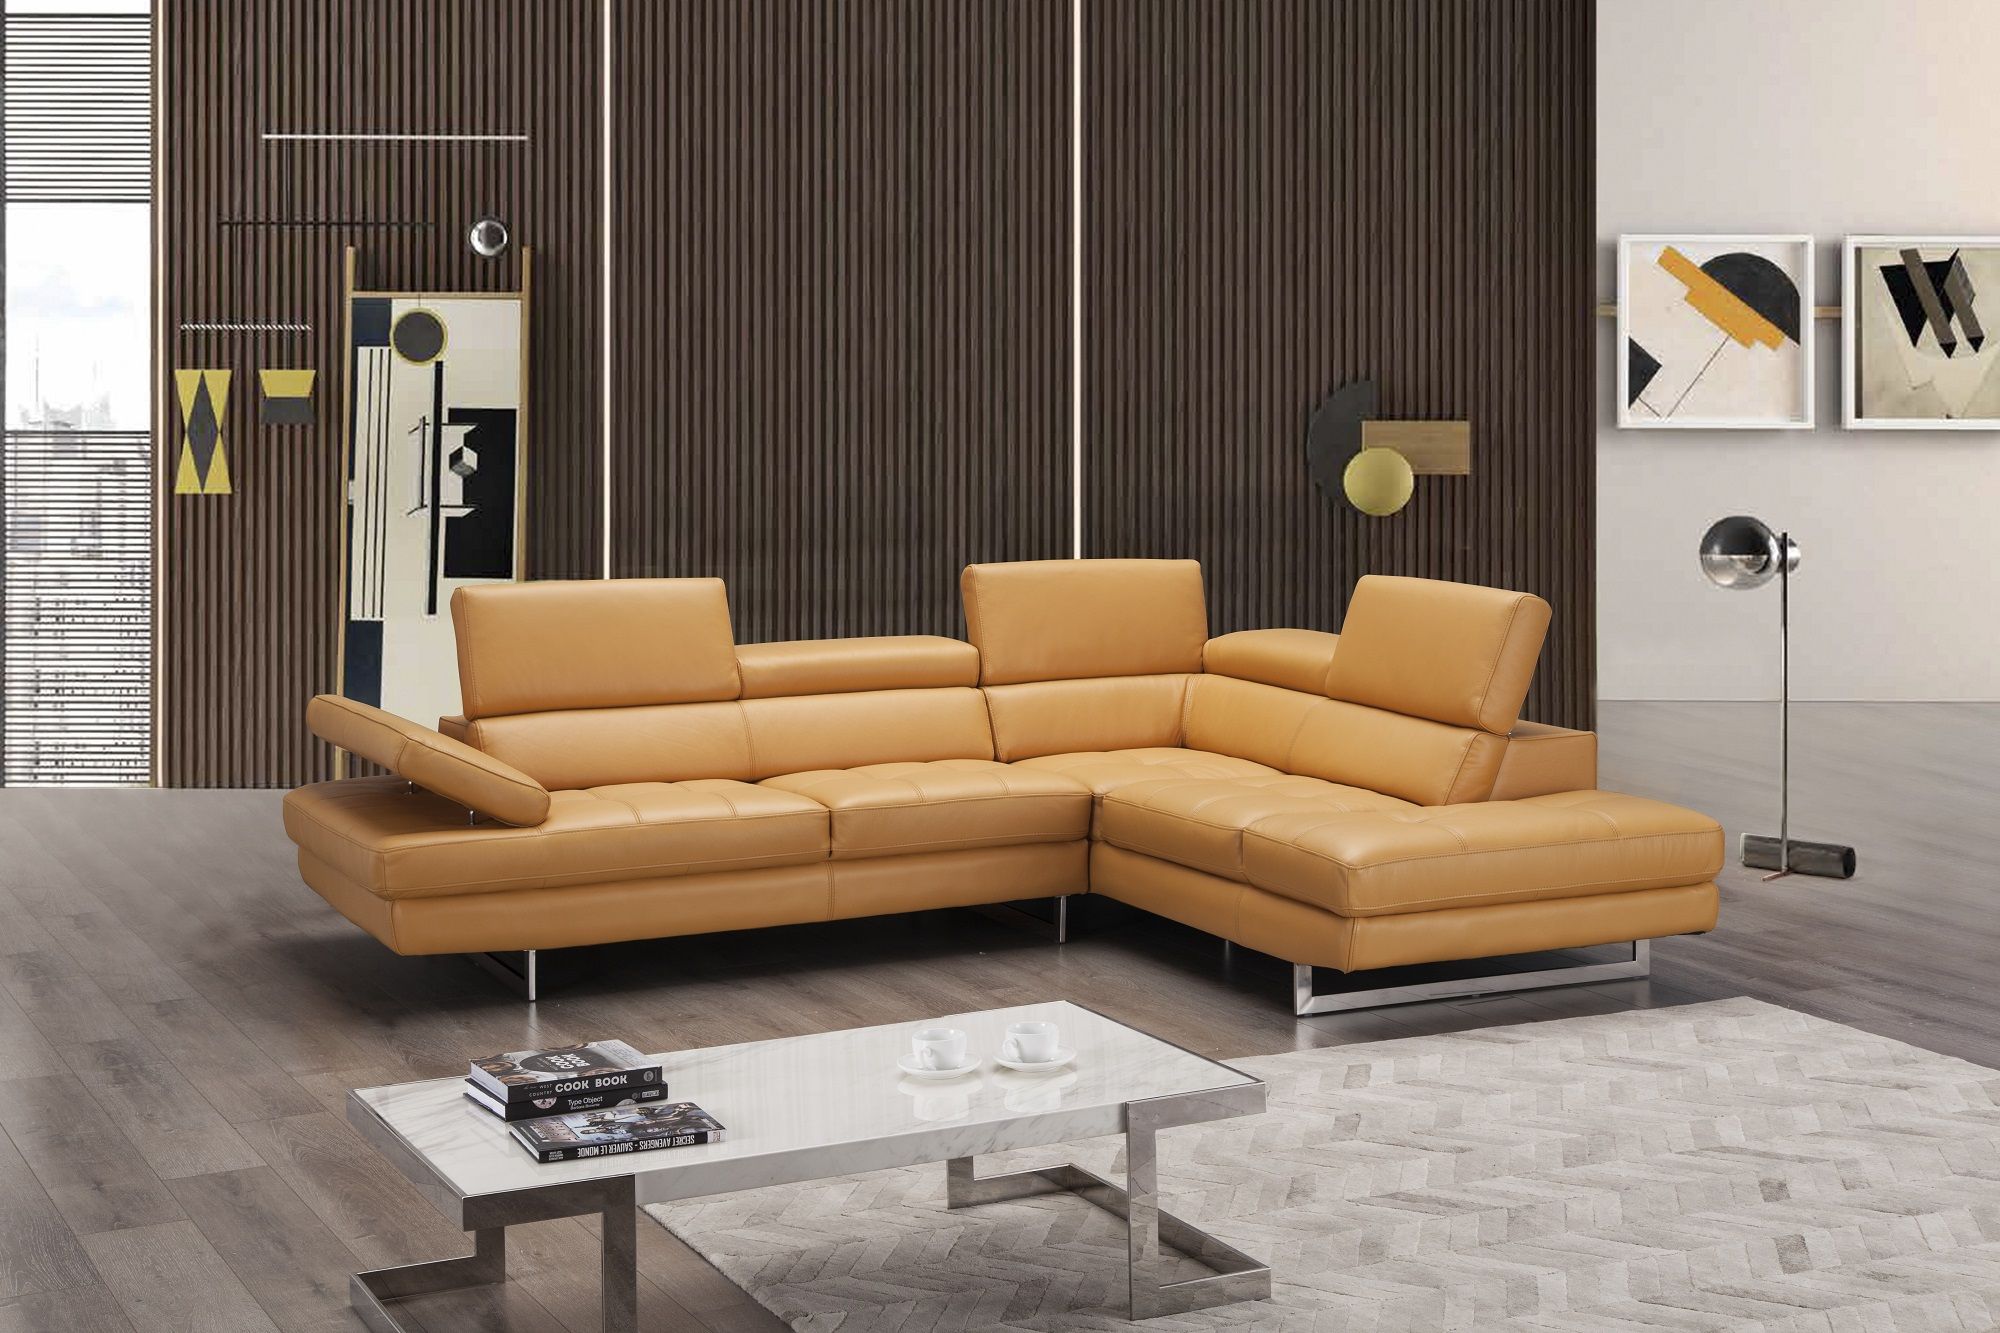 Elegant Modern Leather L Shape Sectional Washington Dc J&m Furniture In Modern L Shaped Sofa Sectionals (View 4 of 20)